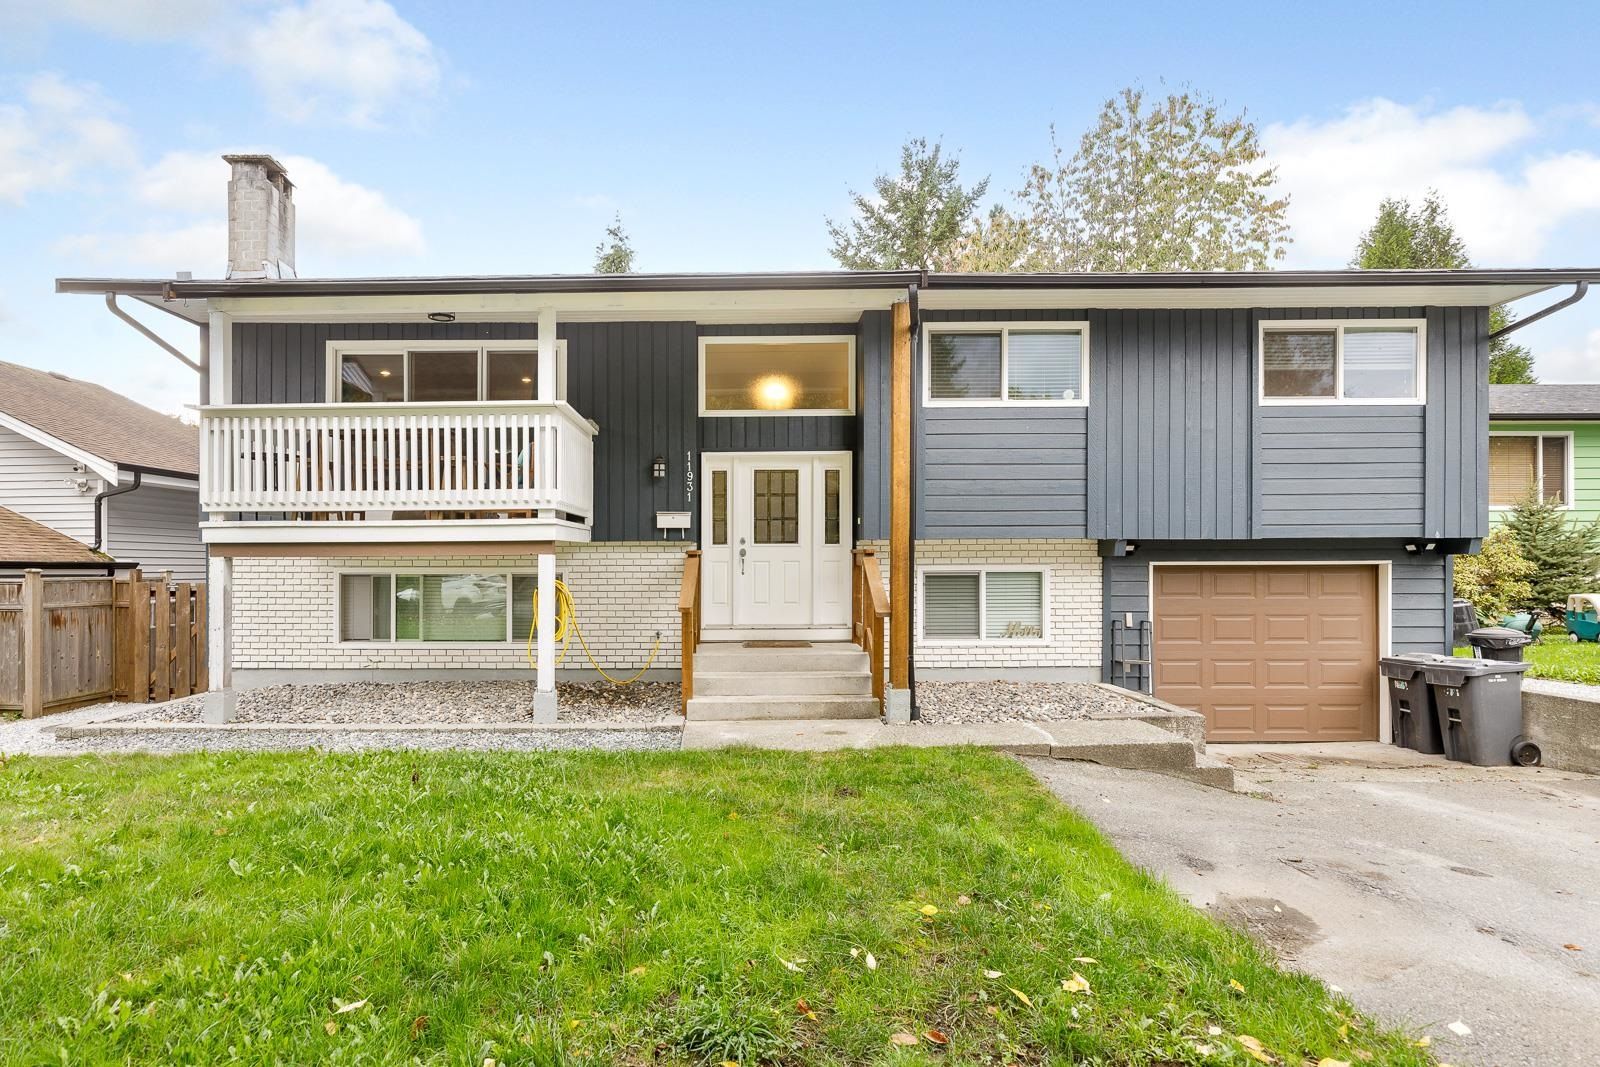 I have sold a property at 11931 WICKLOW WAY in MAPLERIDGE
